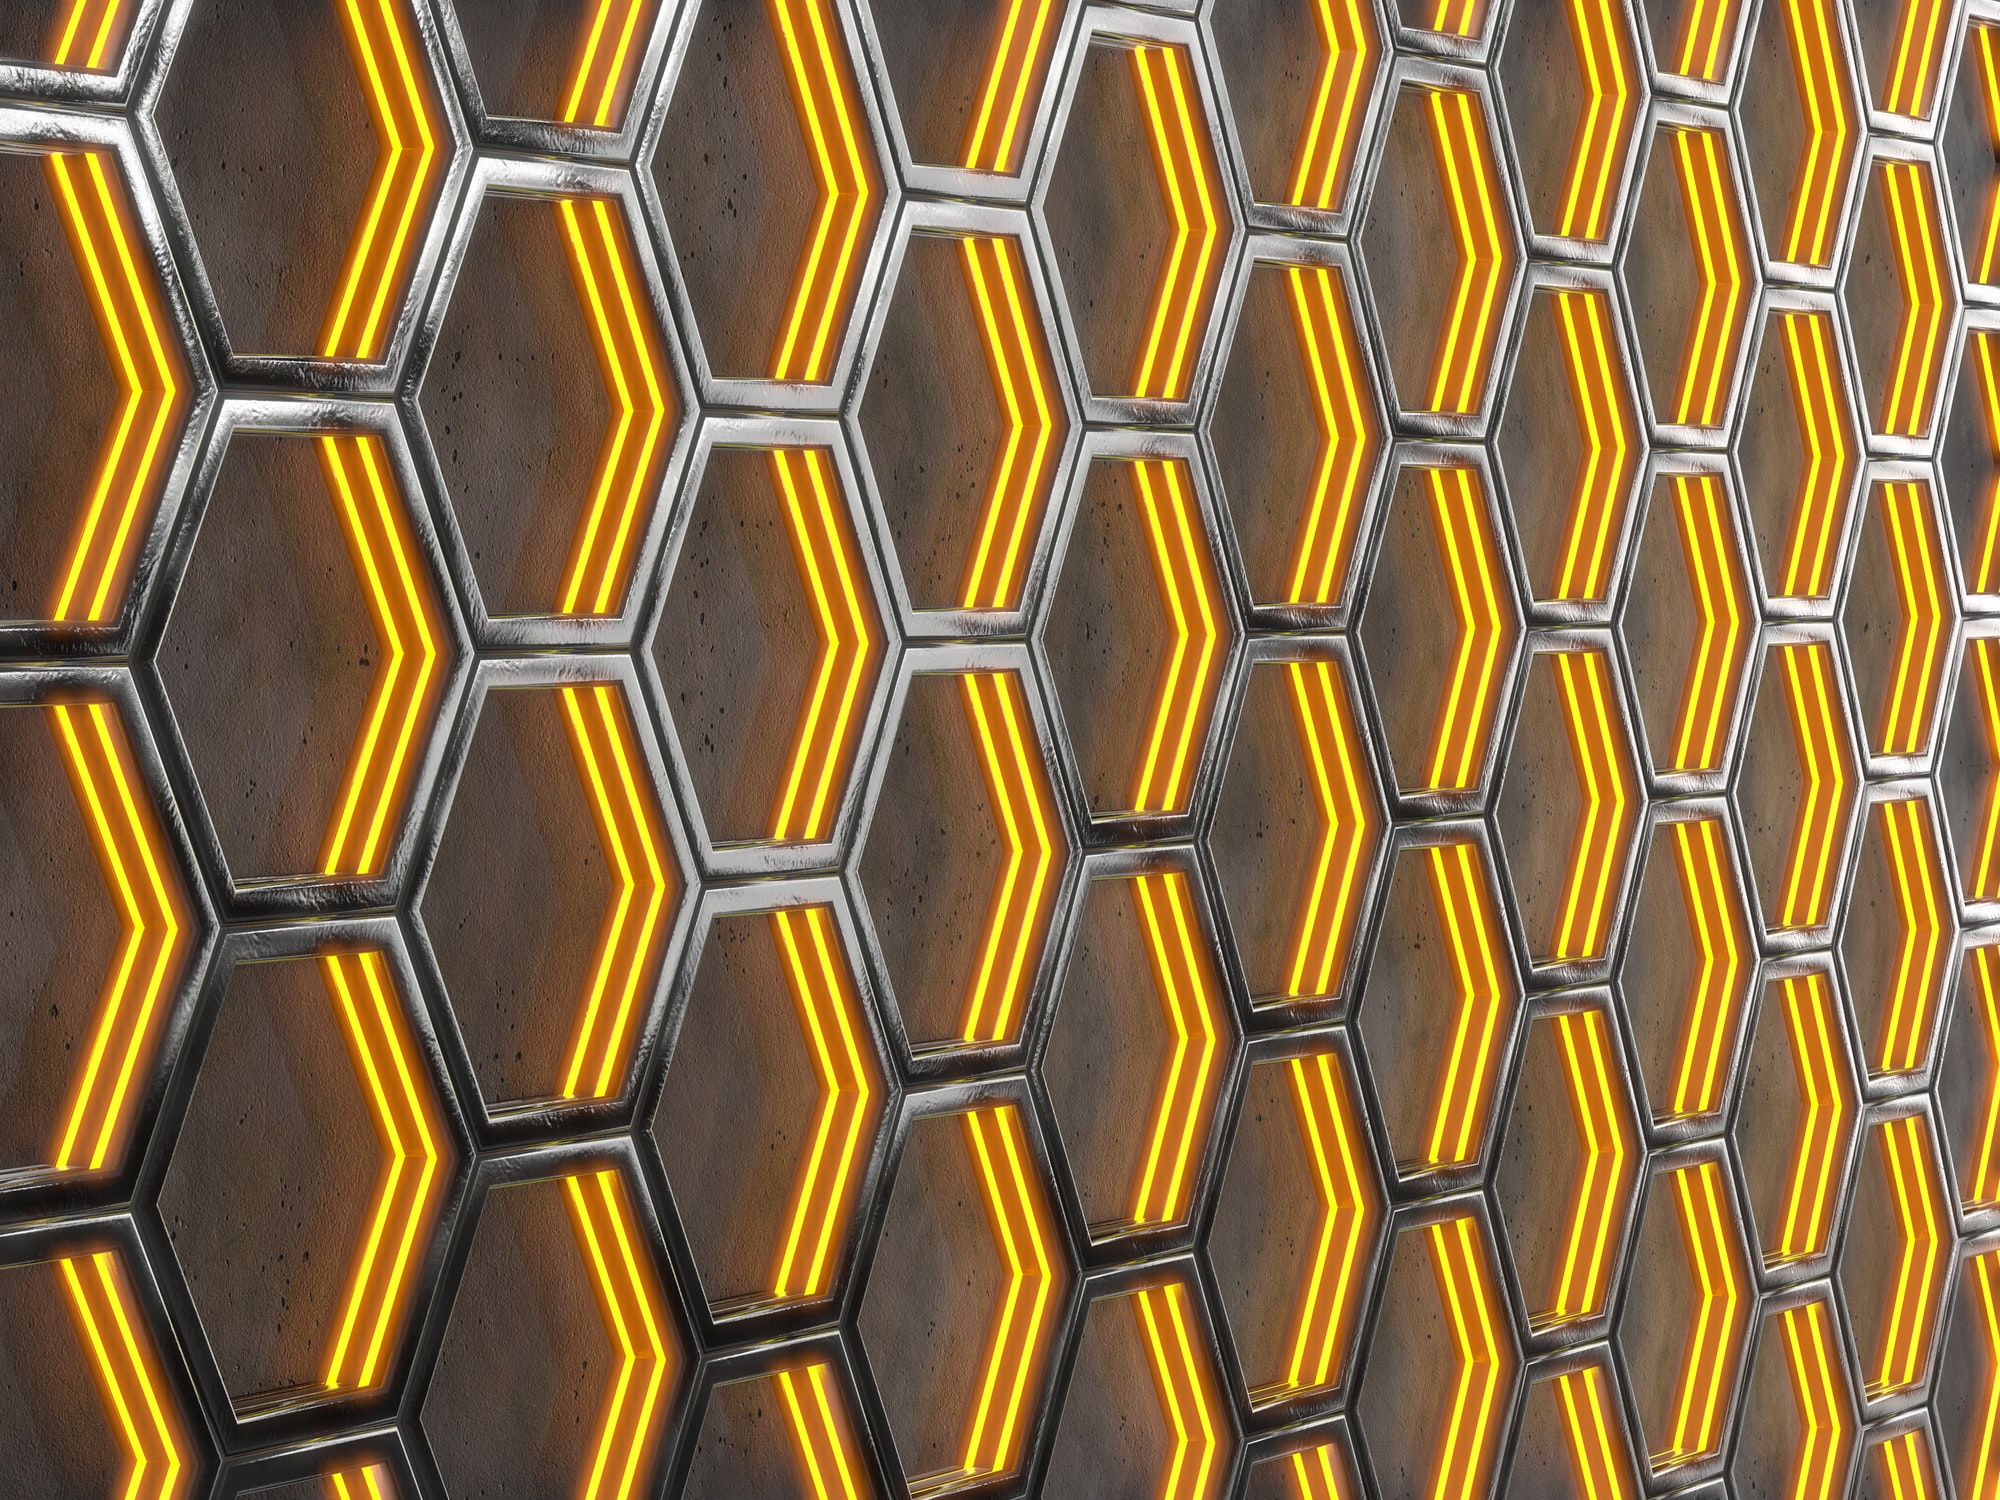 Glowing hexagonal cells on a concrete background. Abstract background with geometric structure.